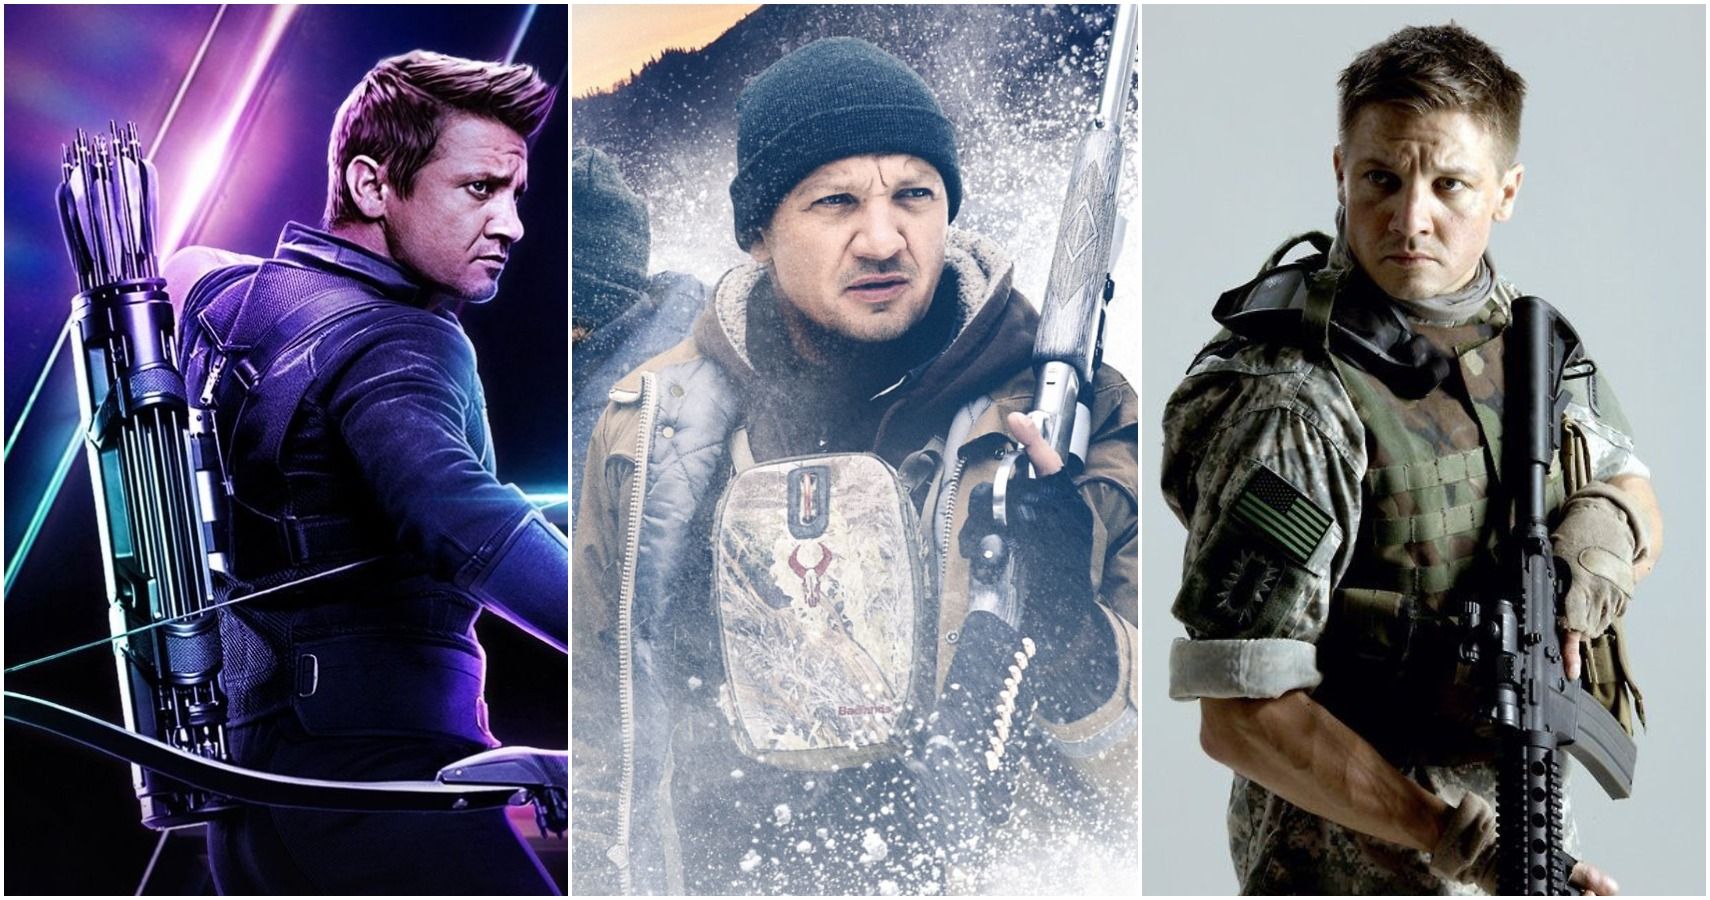 Jeremy Renner’s 10 Best Movies (According To Metacritic)